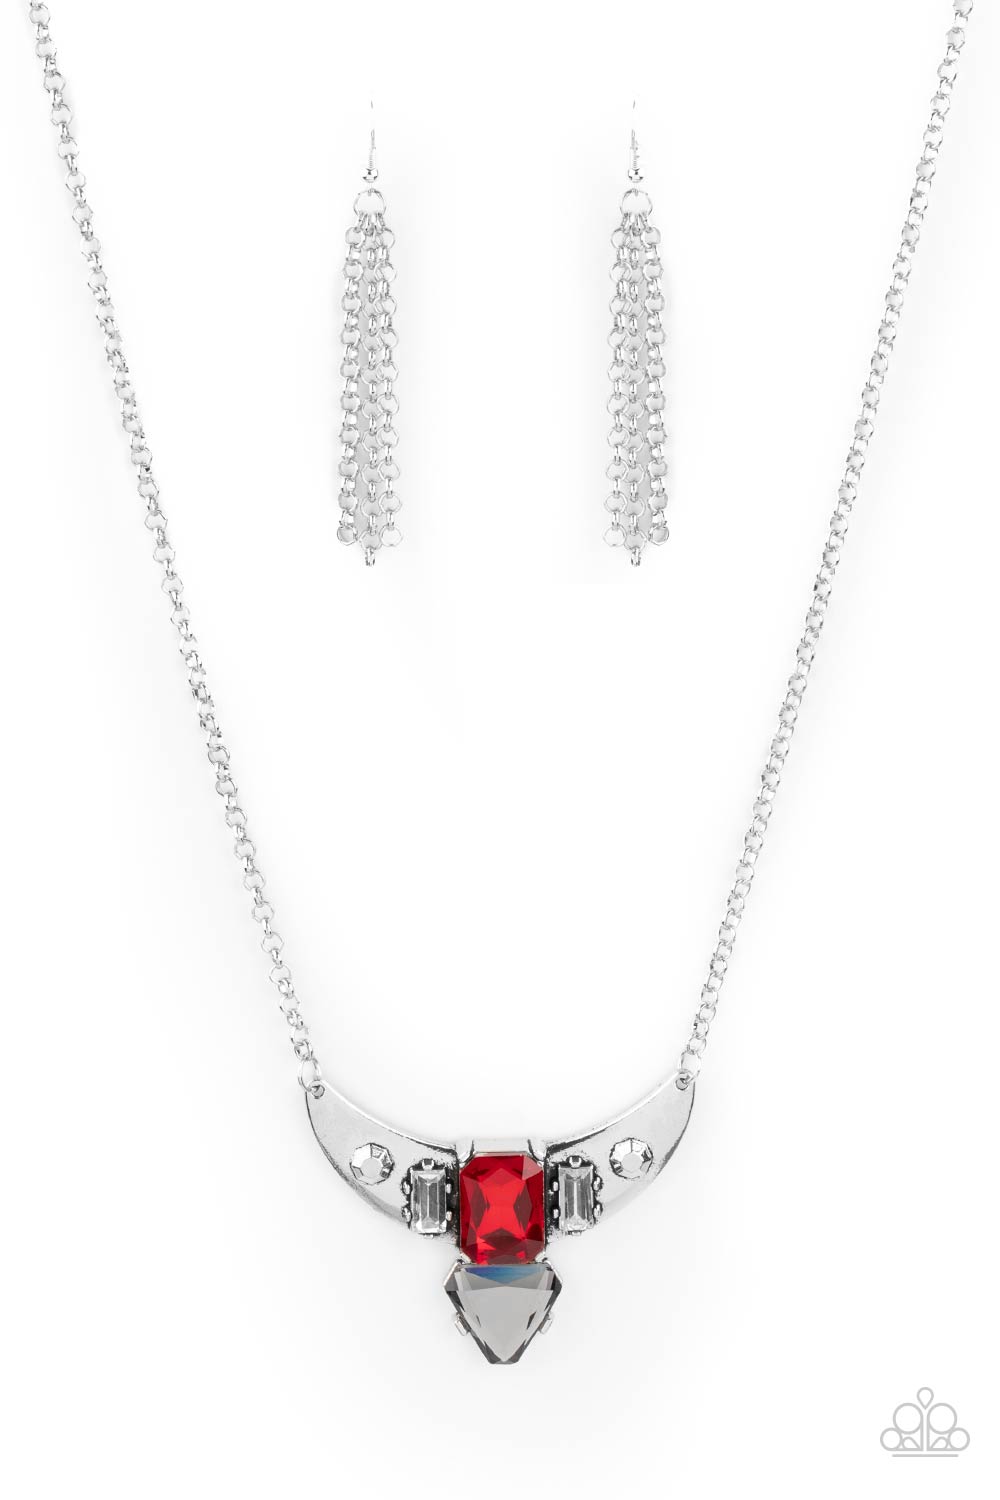 Paparazzi - You the TALISMAN! - Red Necklace - Alies Bling Bar